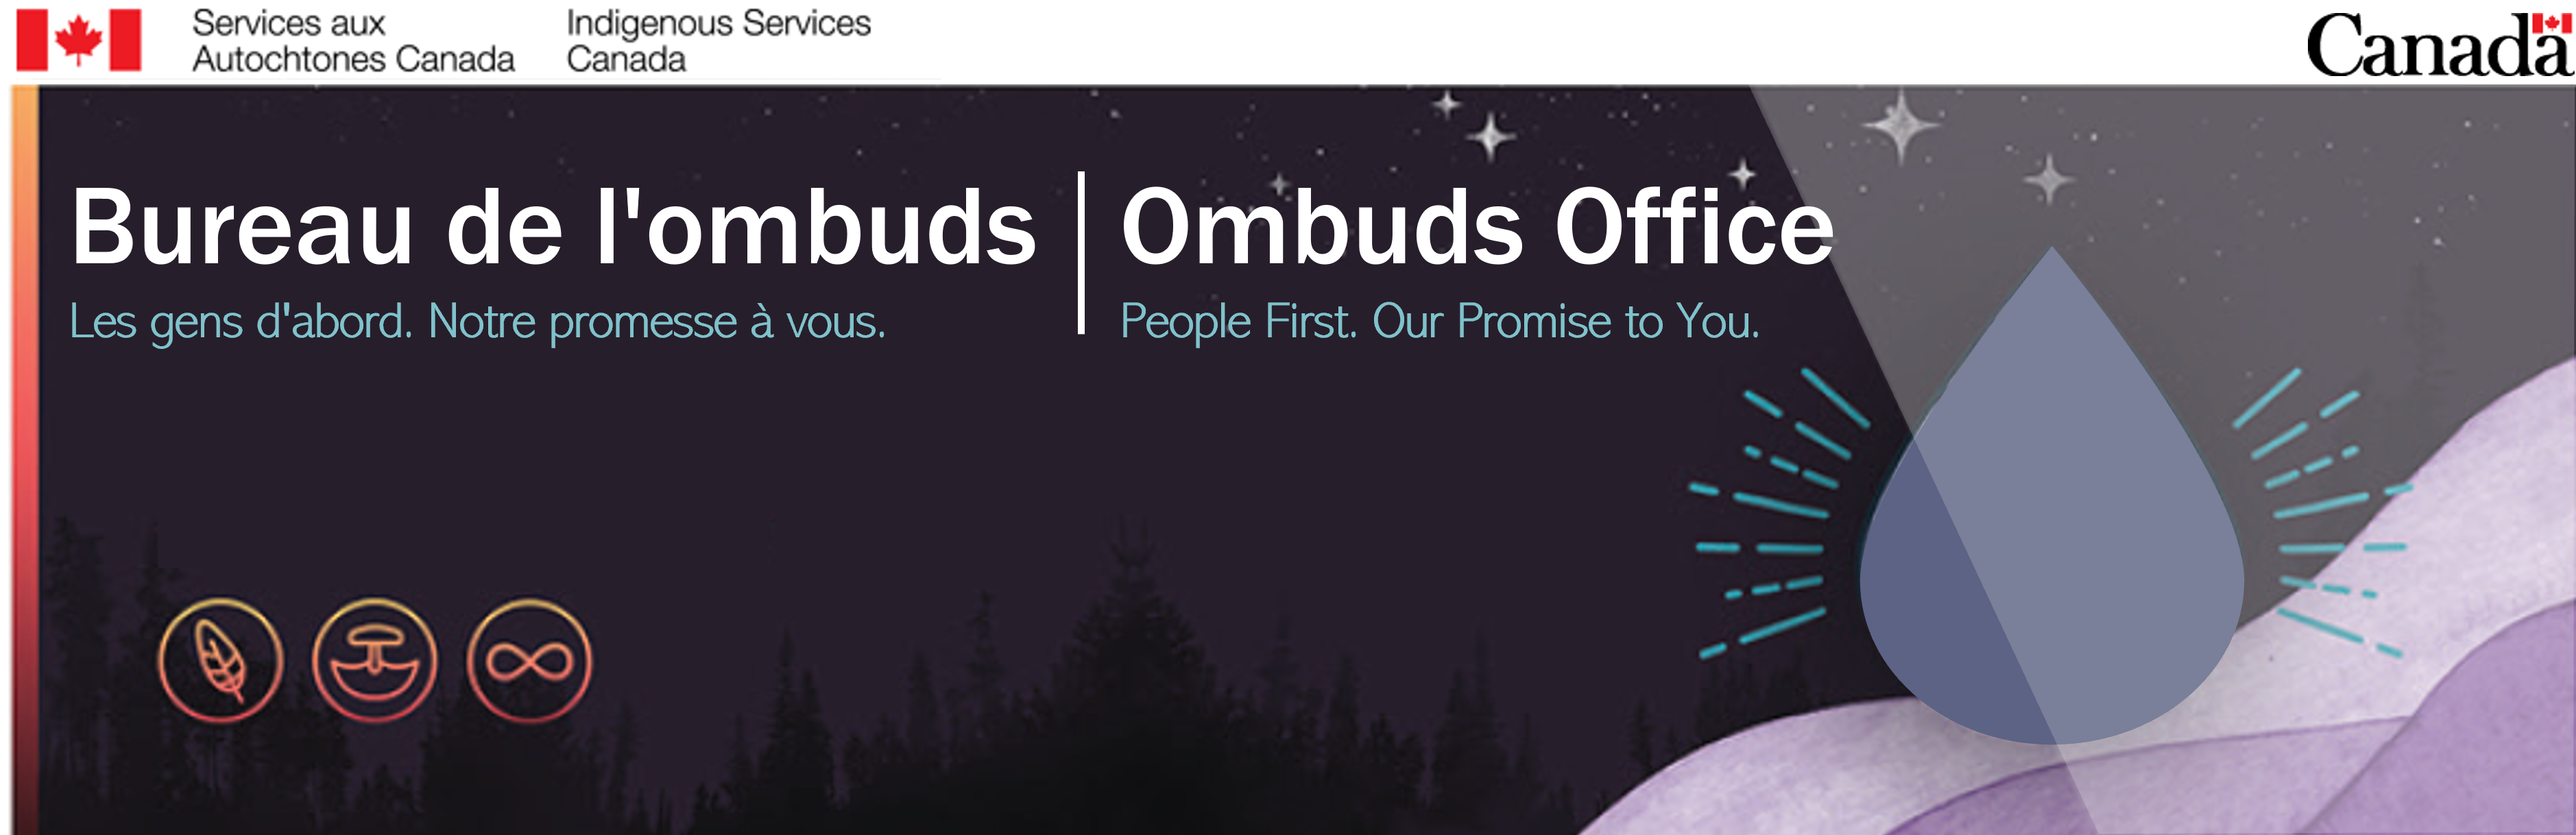 The Ombuds office visual identity banner is inspired by the artwork of Emily Brascoupe-Hoefler, a senior policy analyst in the Strategic Policy and Partnerships sector at Indigenous Services Canada. Emily is also an incredible mixed media artist and educator who creates pieces of art inspired by her family, community teachings and her experiences on the land.  Emily’s pieces have been displayed in public spaces across the NCR. Her most recent artwork Pangawogo Ninga Akì – meaning Heartbeat of Mother Earth in Anishinaabemowin – can be viewed at the Kipnes Lantern located inside the National Arts Centre’s Canal lobby in Ottawa. See more of her work at www.emilybrascoupe.com.